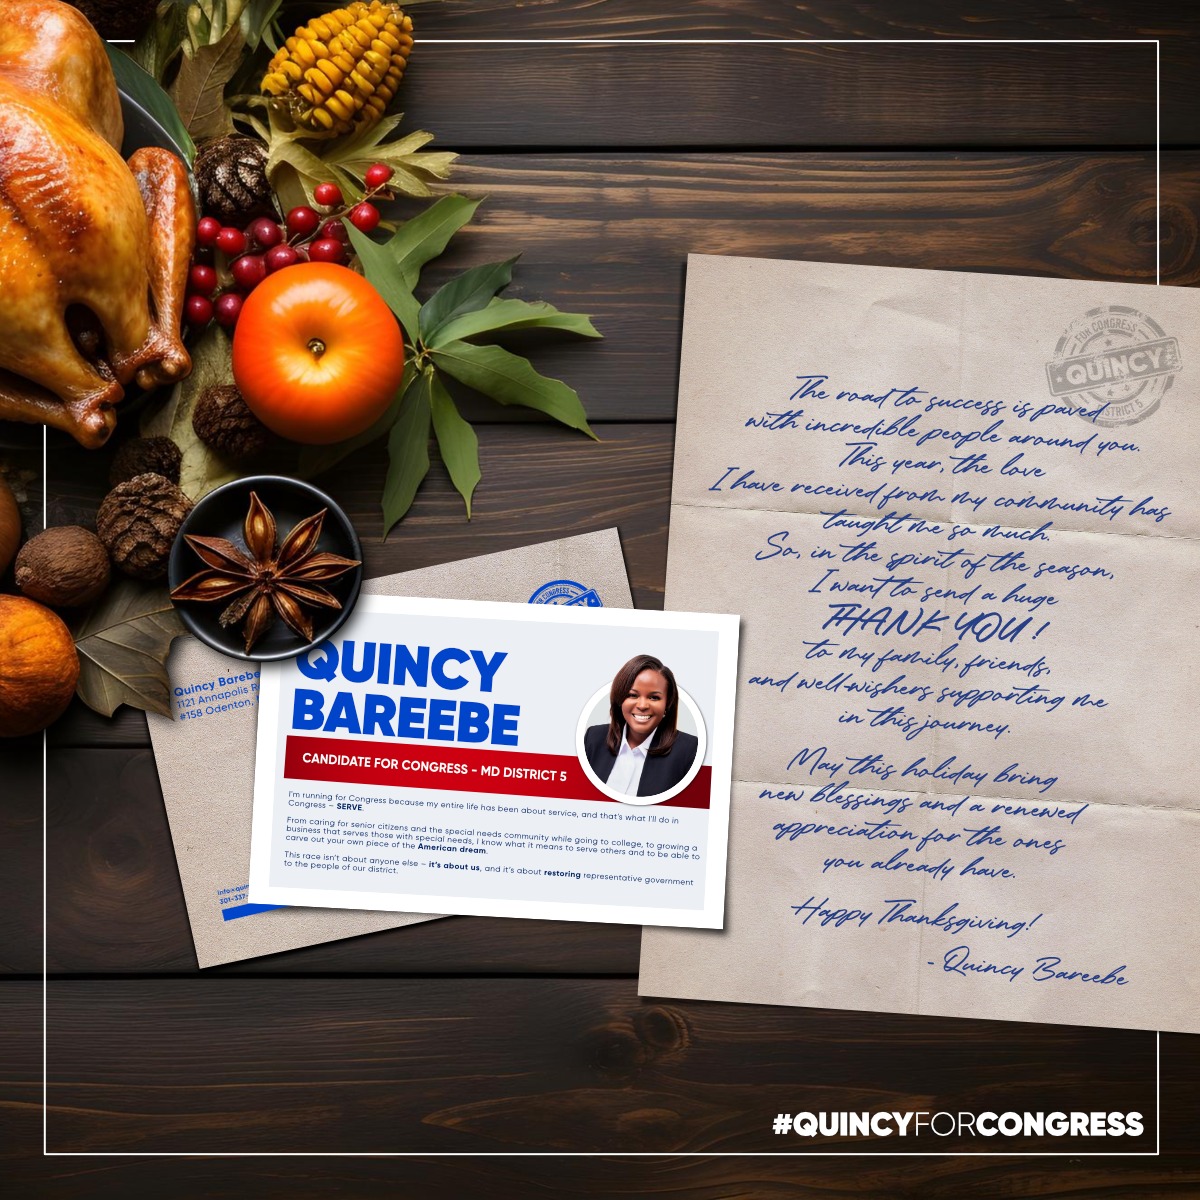 With a BIG grateful heart, thank you to all my friends, family, my team, volunteers and everyone who supports me in this journey as I run for Congress Maryland District 5.
#Thanksgiving  #annearundelcounty #turkeyday #quincyforcongress #ThanksgivingDay2023 #grateful